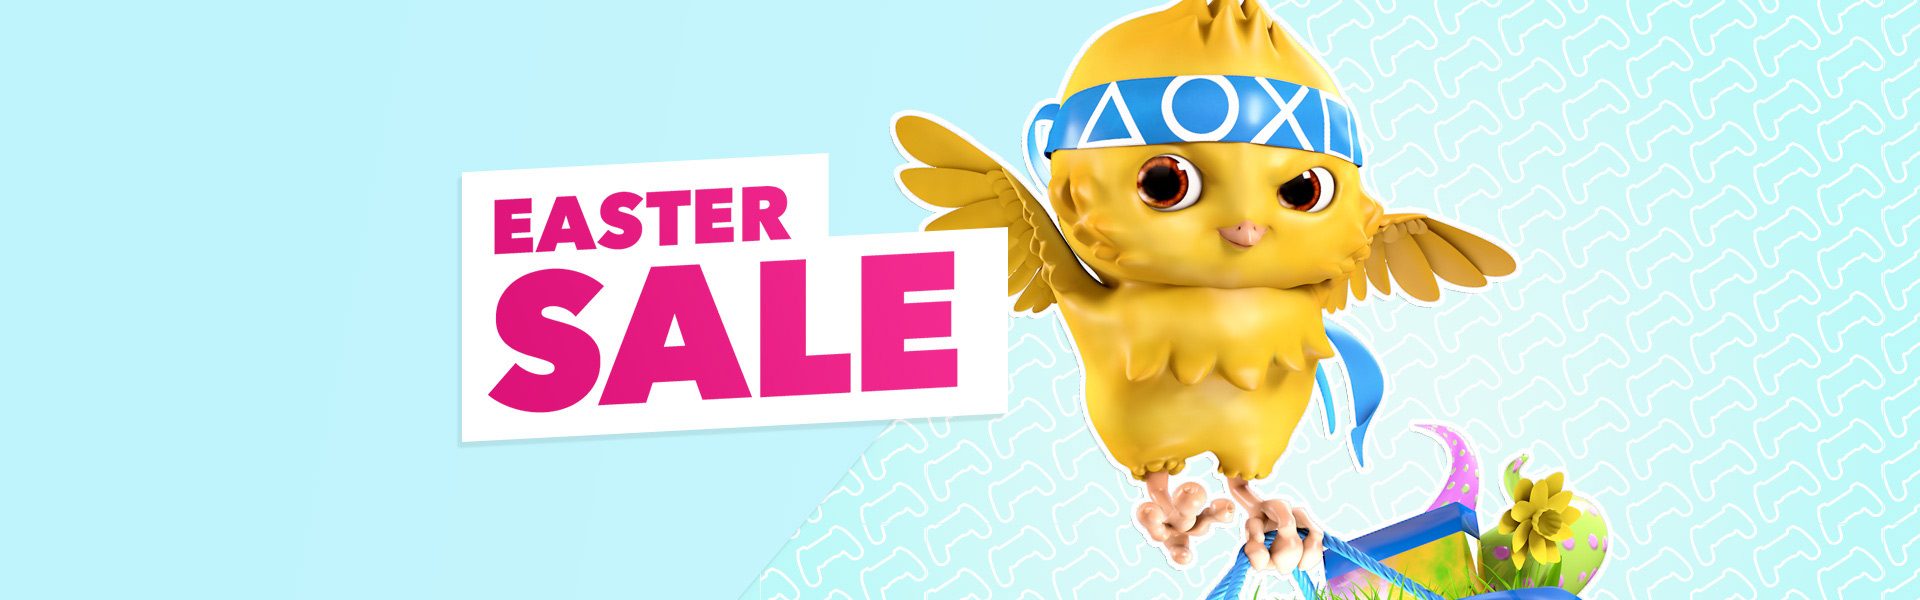 ps4 easter sale